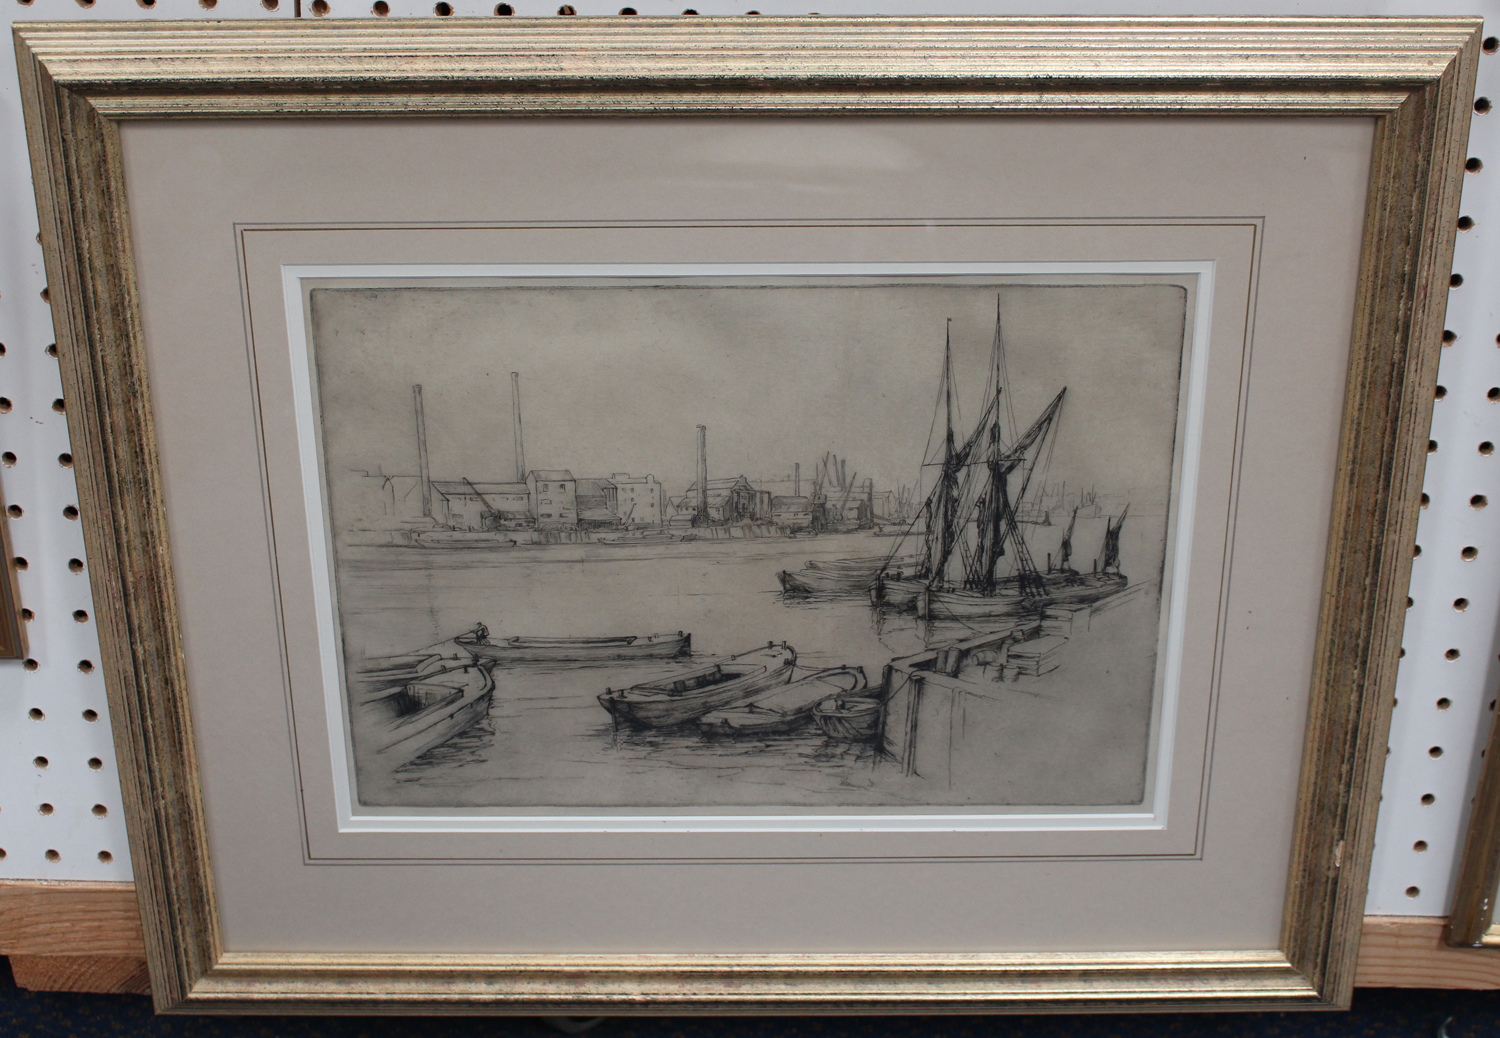 Frank Henry Mason - 'Morning Market, N. Shields', early 20th century etching, signed and titled in - Image 3 of 6